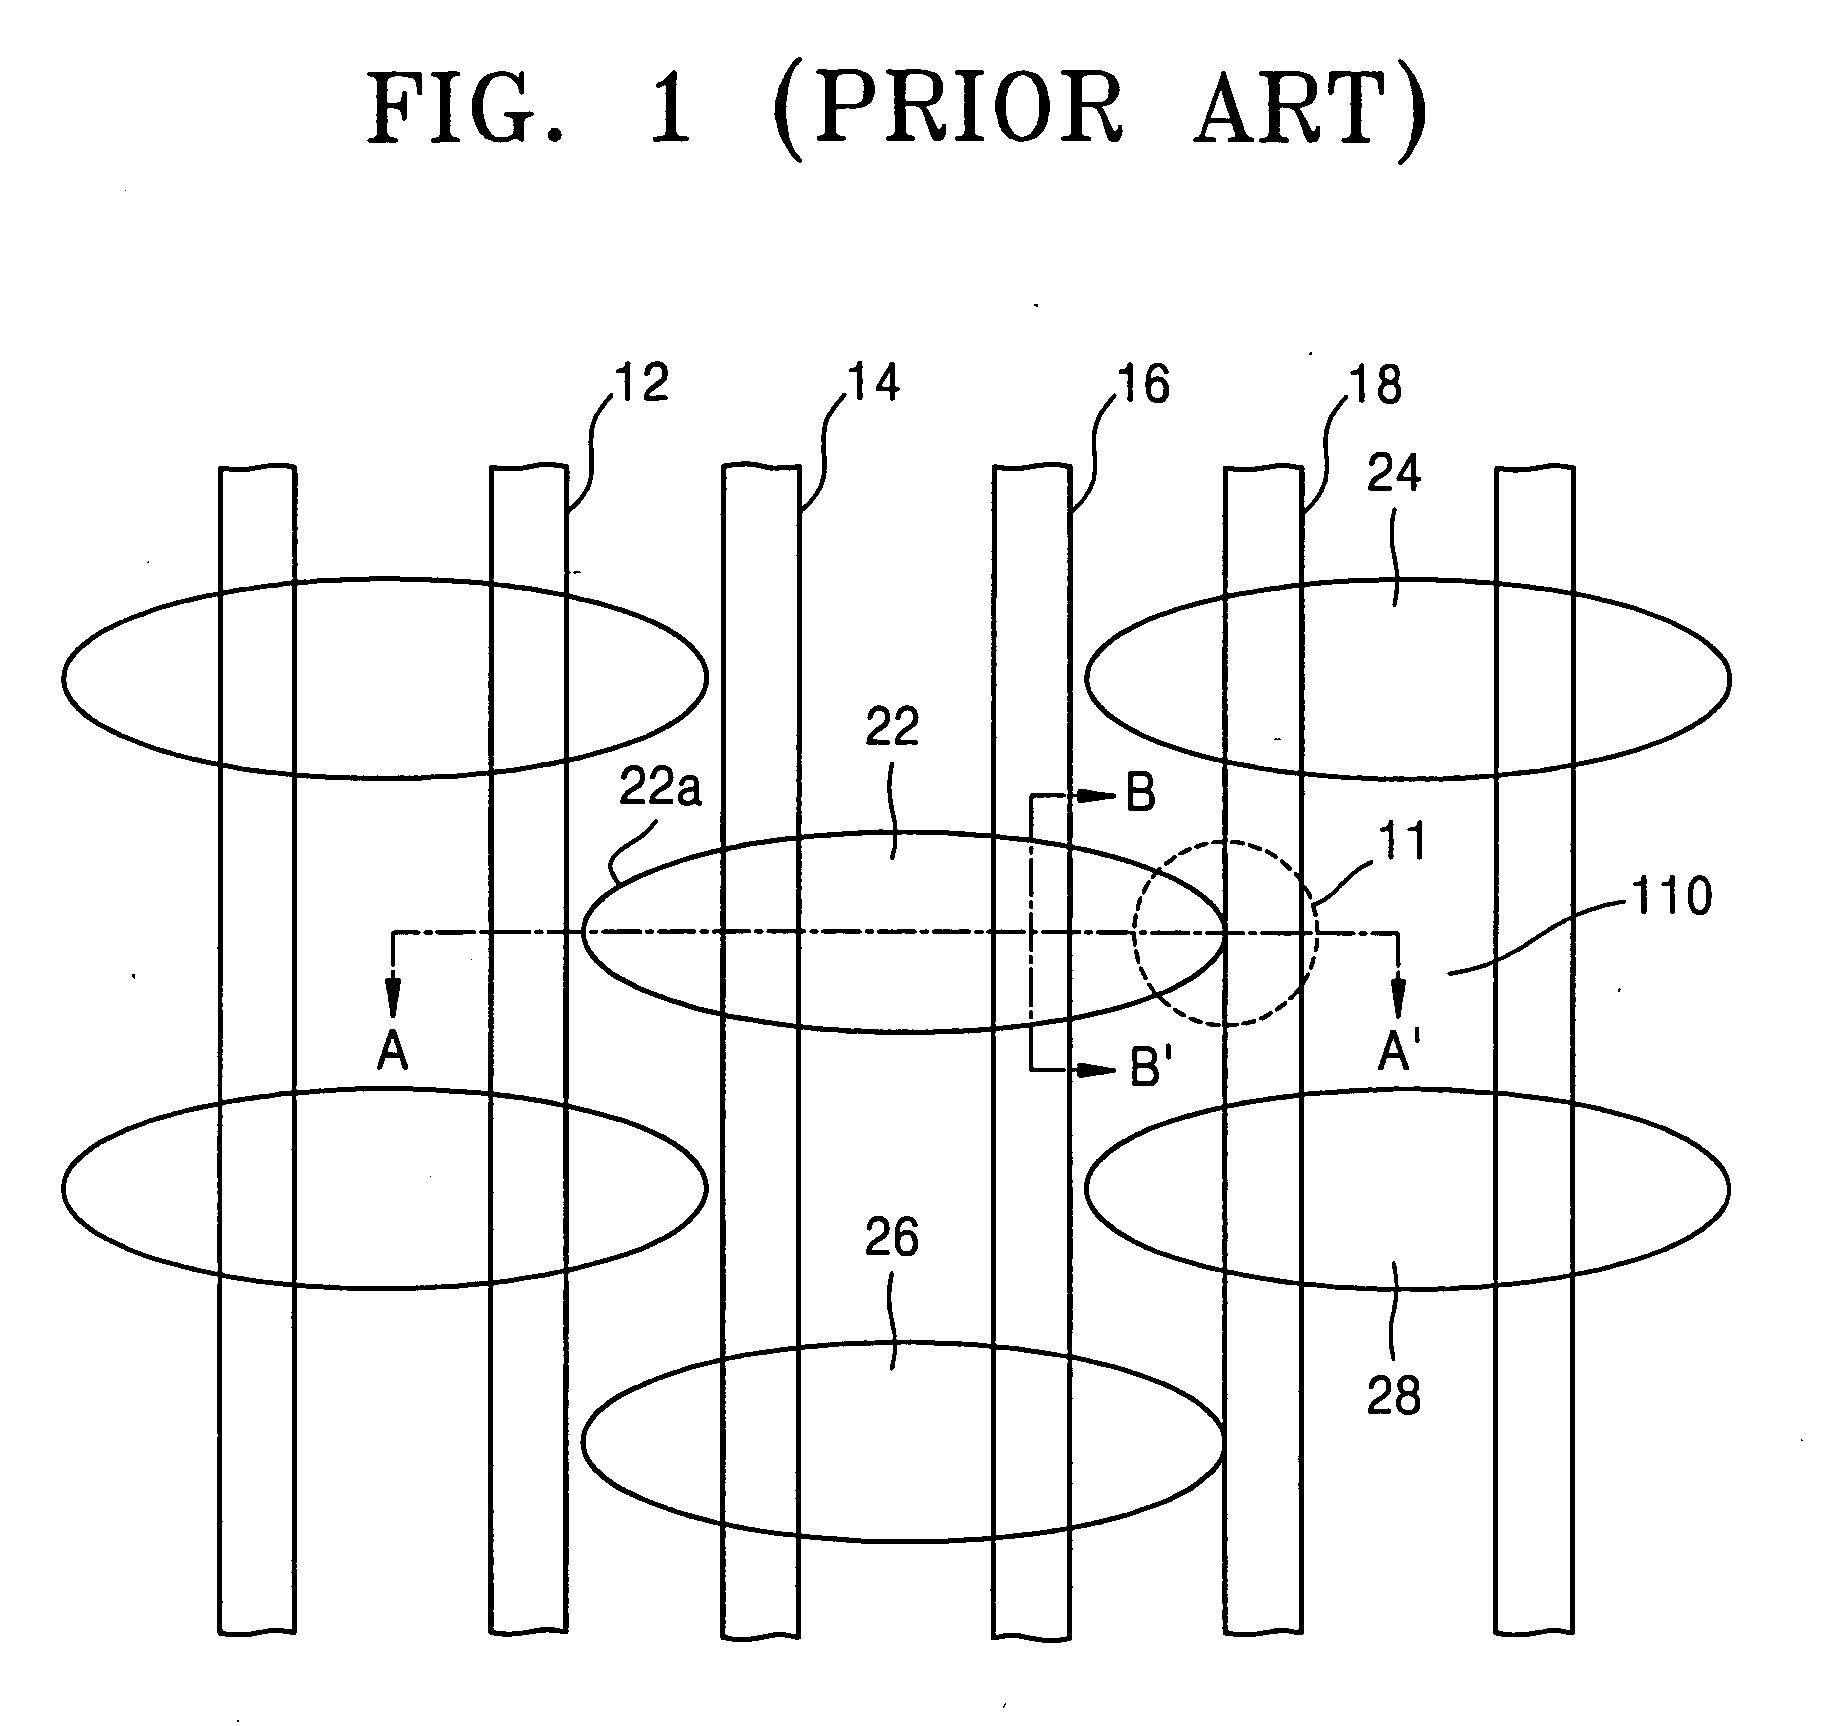 Method of forming a recess channel trench pattern, and fabricating a recess channel transistor